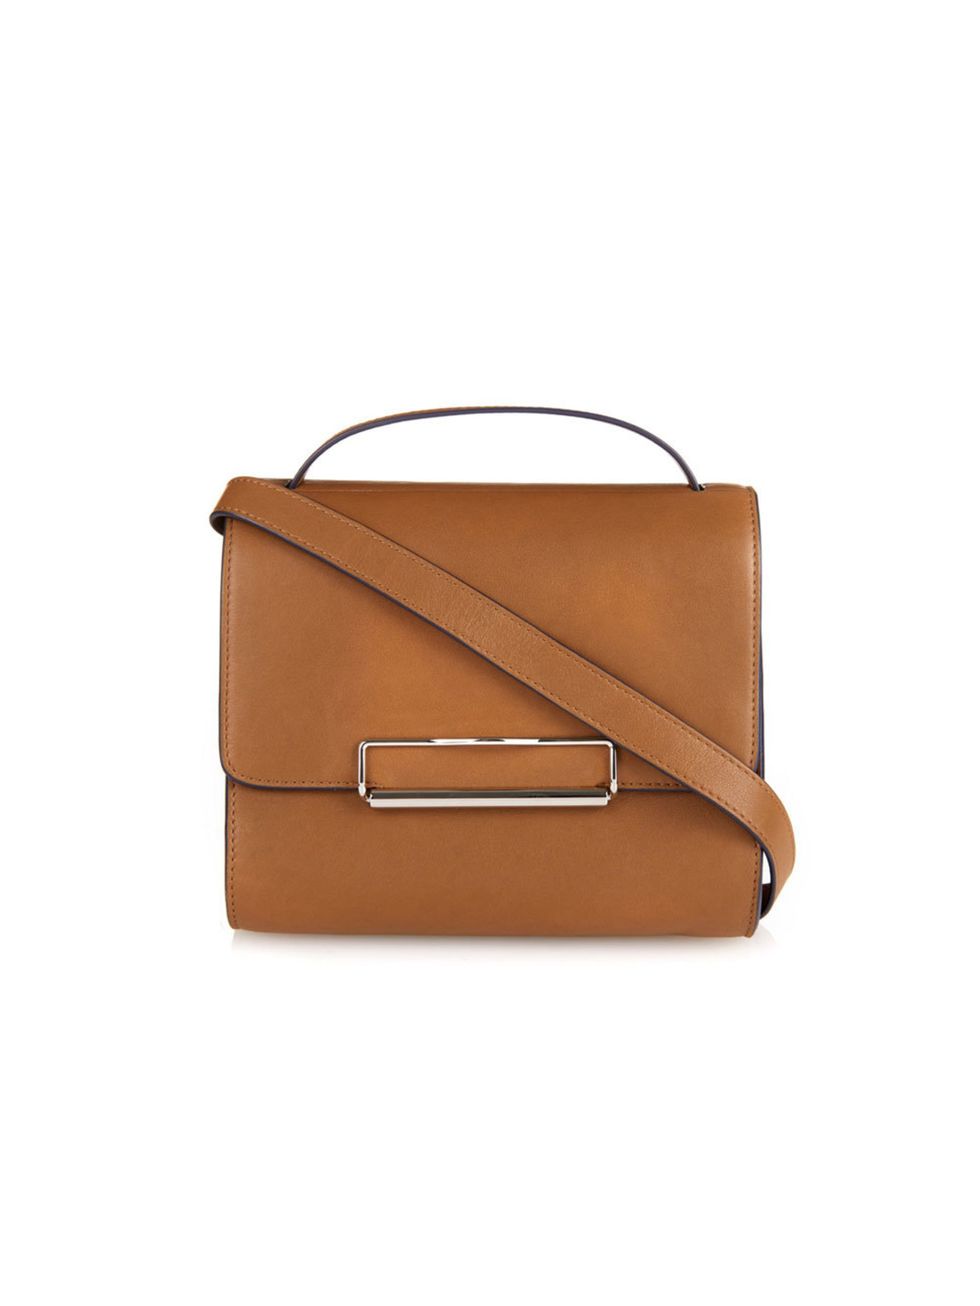 Brown, Bag, Style, Tan, Fashion accessory, Luggage and bags, Leather, Orange, Shoulder bag, Khaki, 